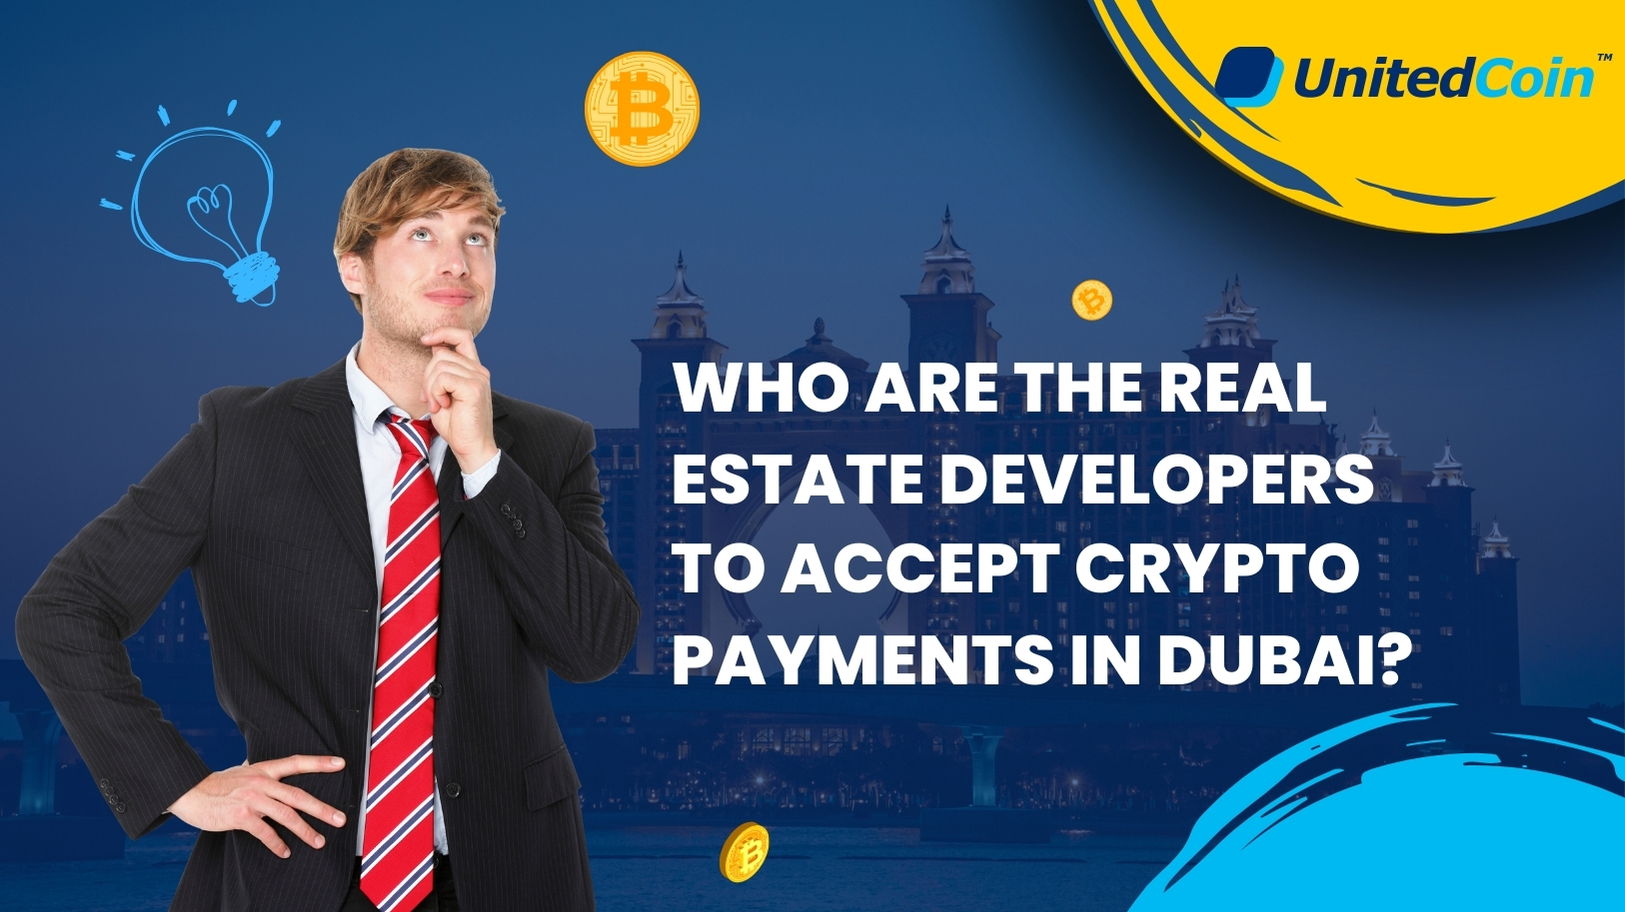 Who are the Real Estate Developers to Accept Crypto Payments in Dubai?